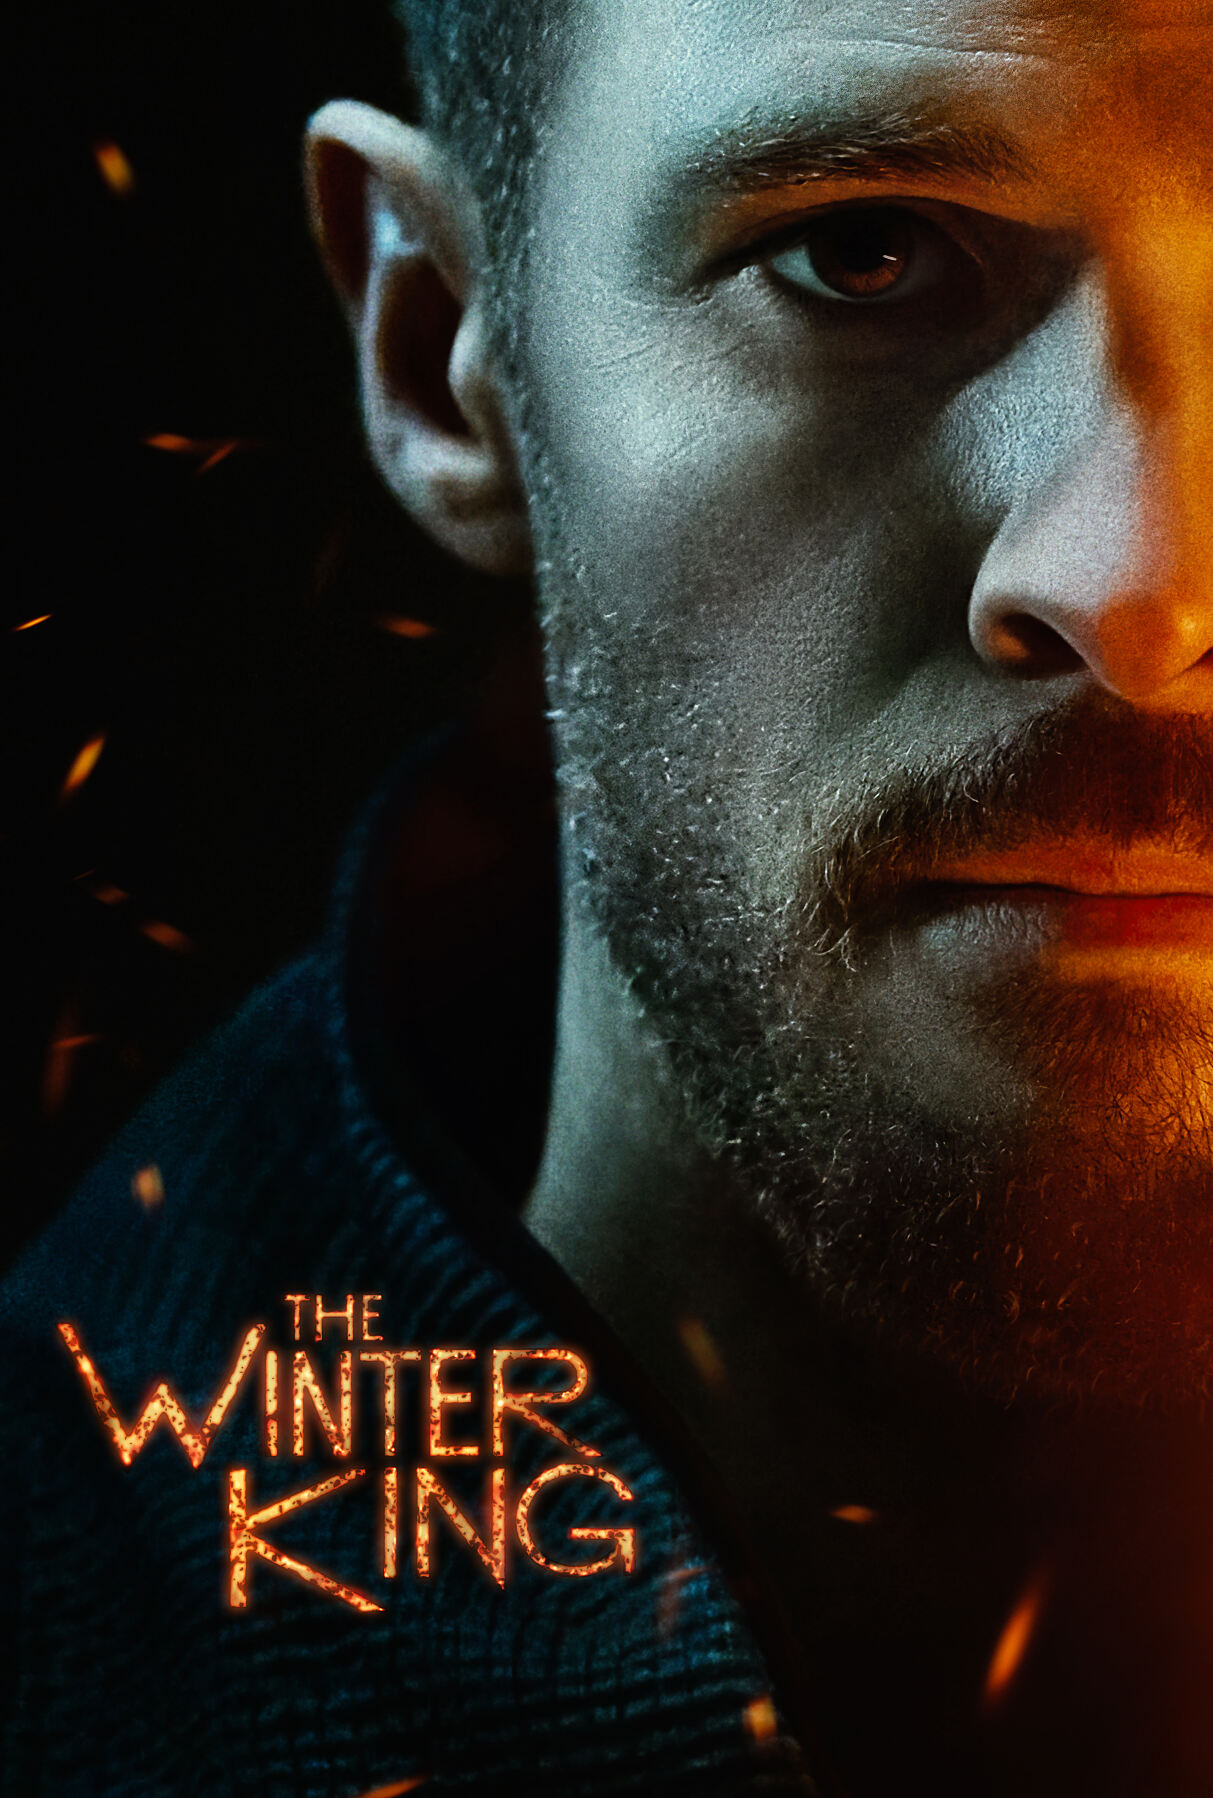 WINTER_KING_THE_UK_S01_KeyArt_Primary_InternationalVersion_Vertical_8088x11984_300ppi_Flattened_Rasterized_Texted_2023_© 2023 Bad Wolf Ltd. All Rights Reserved.